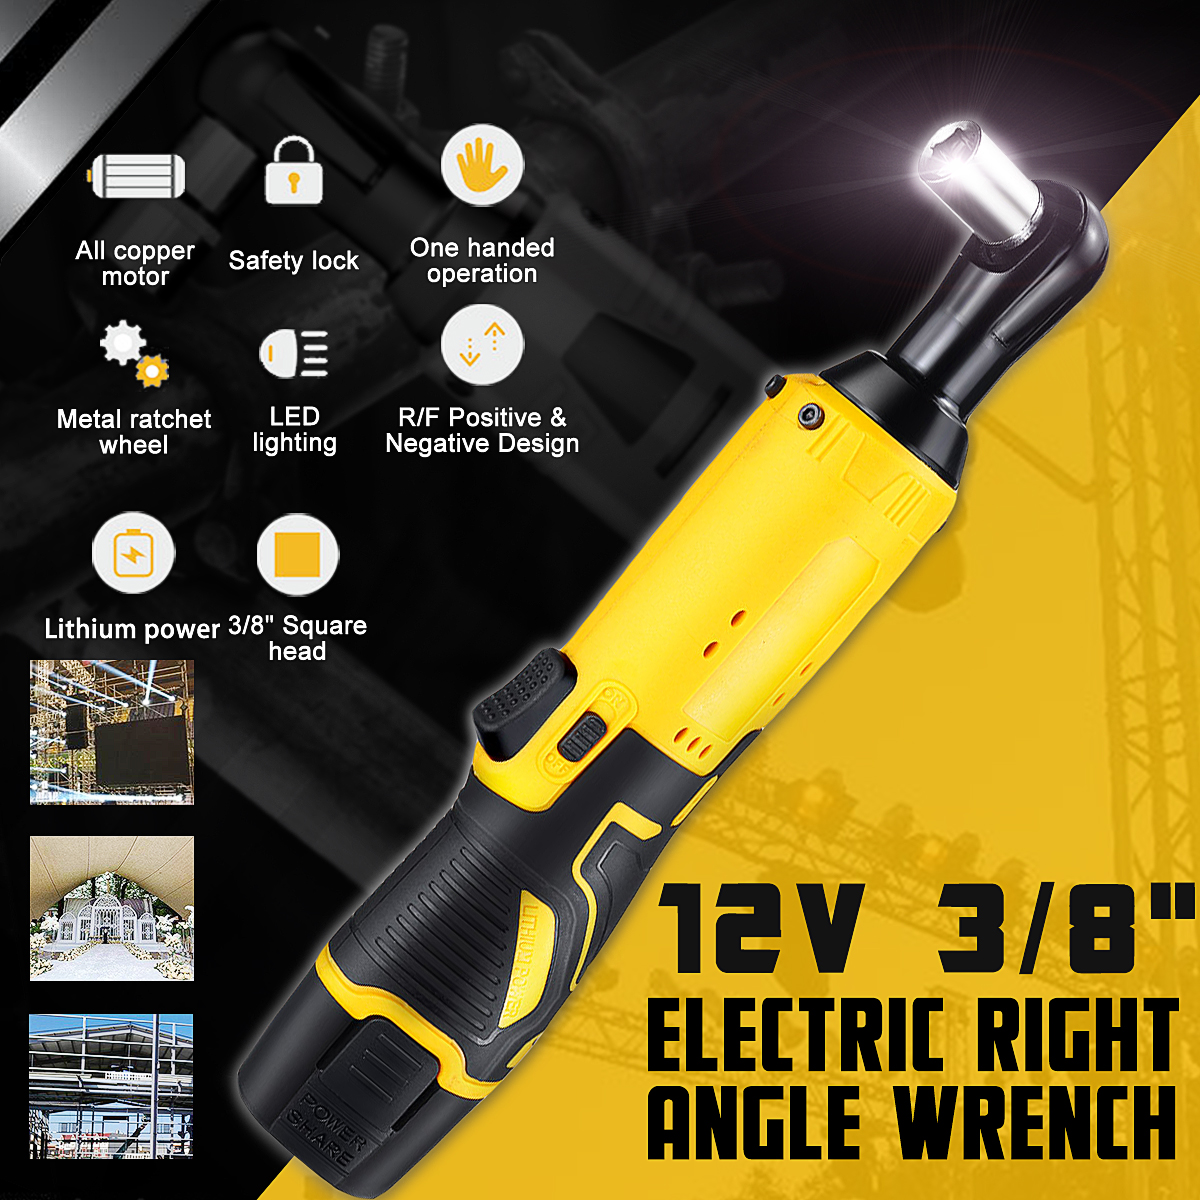 12V 45N.m Ratchet Wrench Electric Rechargeable Ratchet 90° Right Angle Wrench Powerful Tool